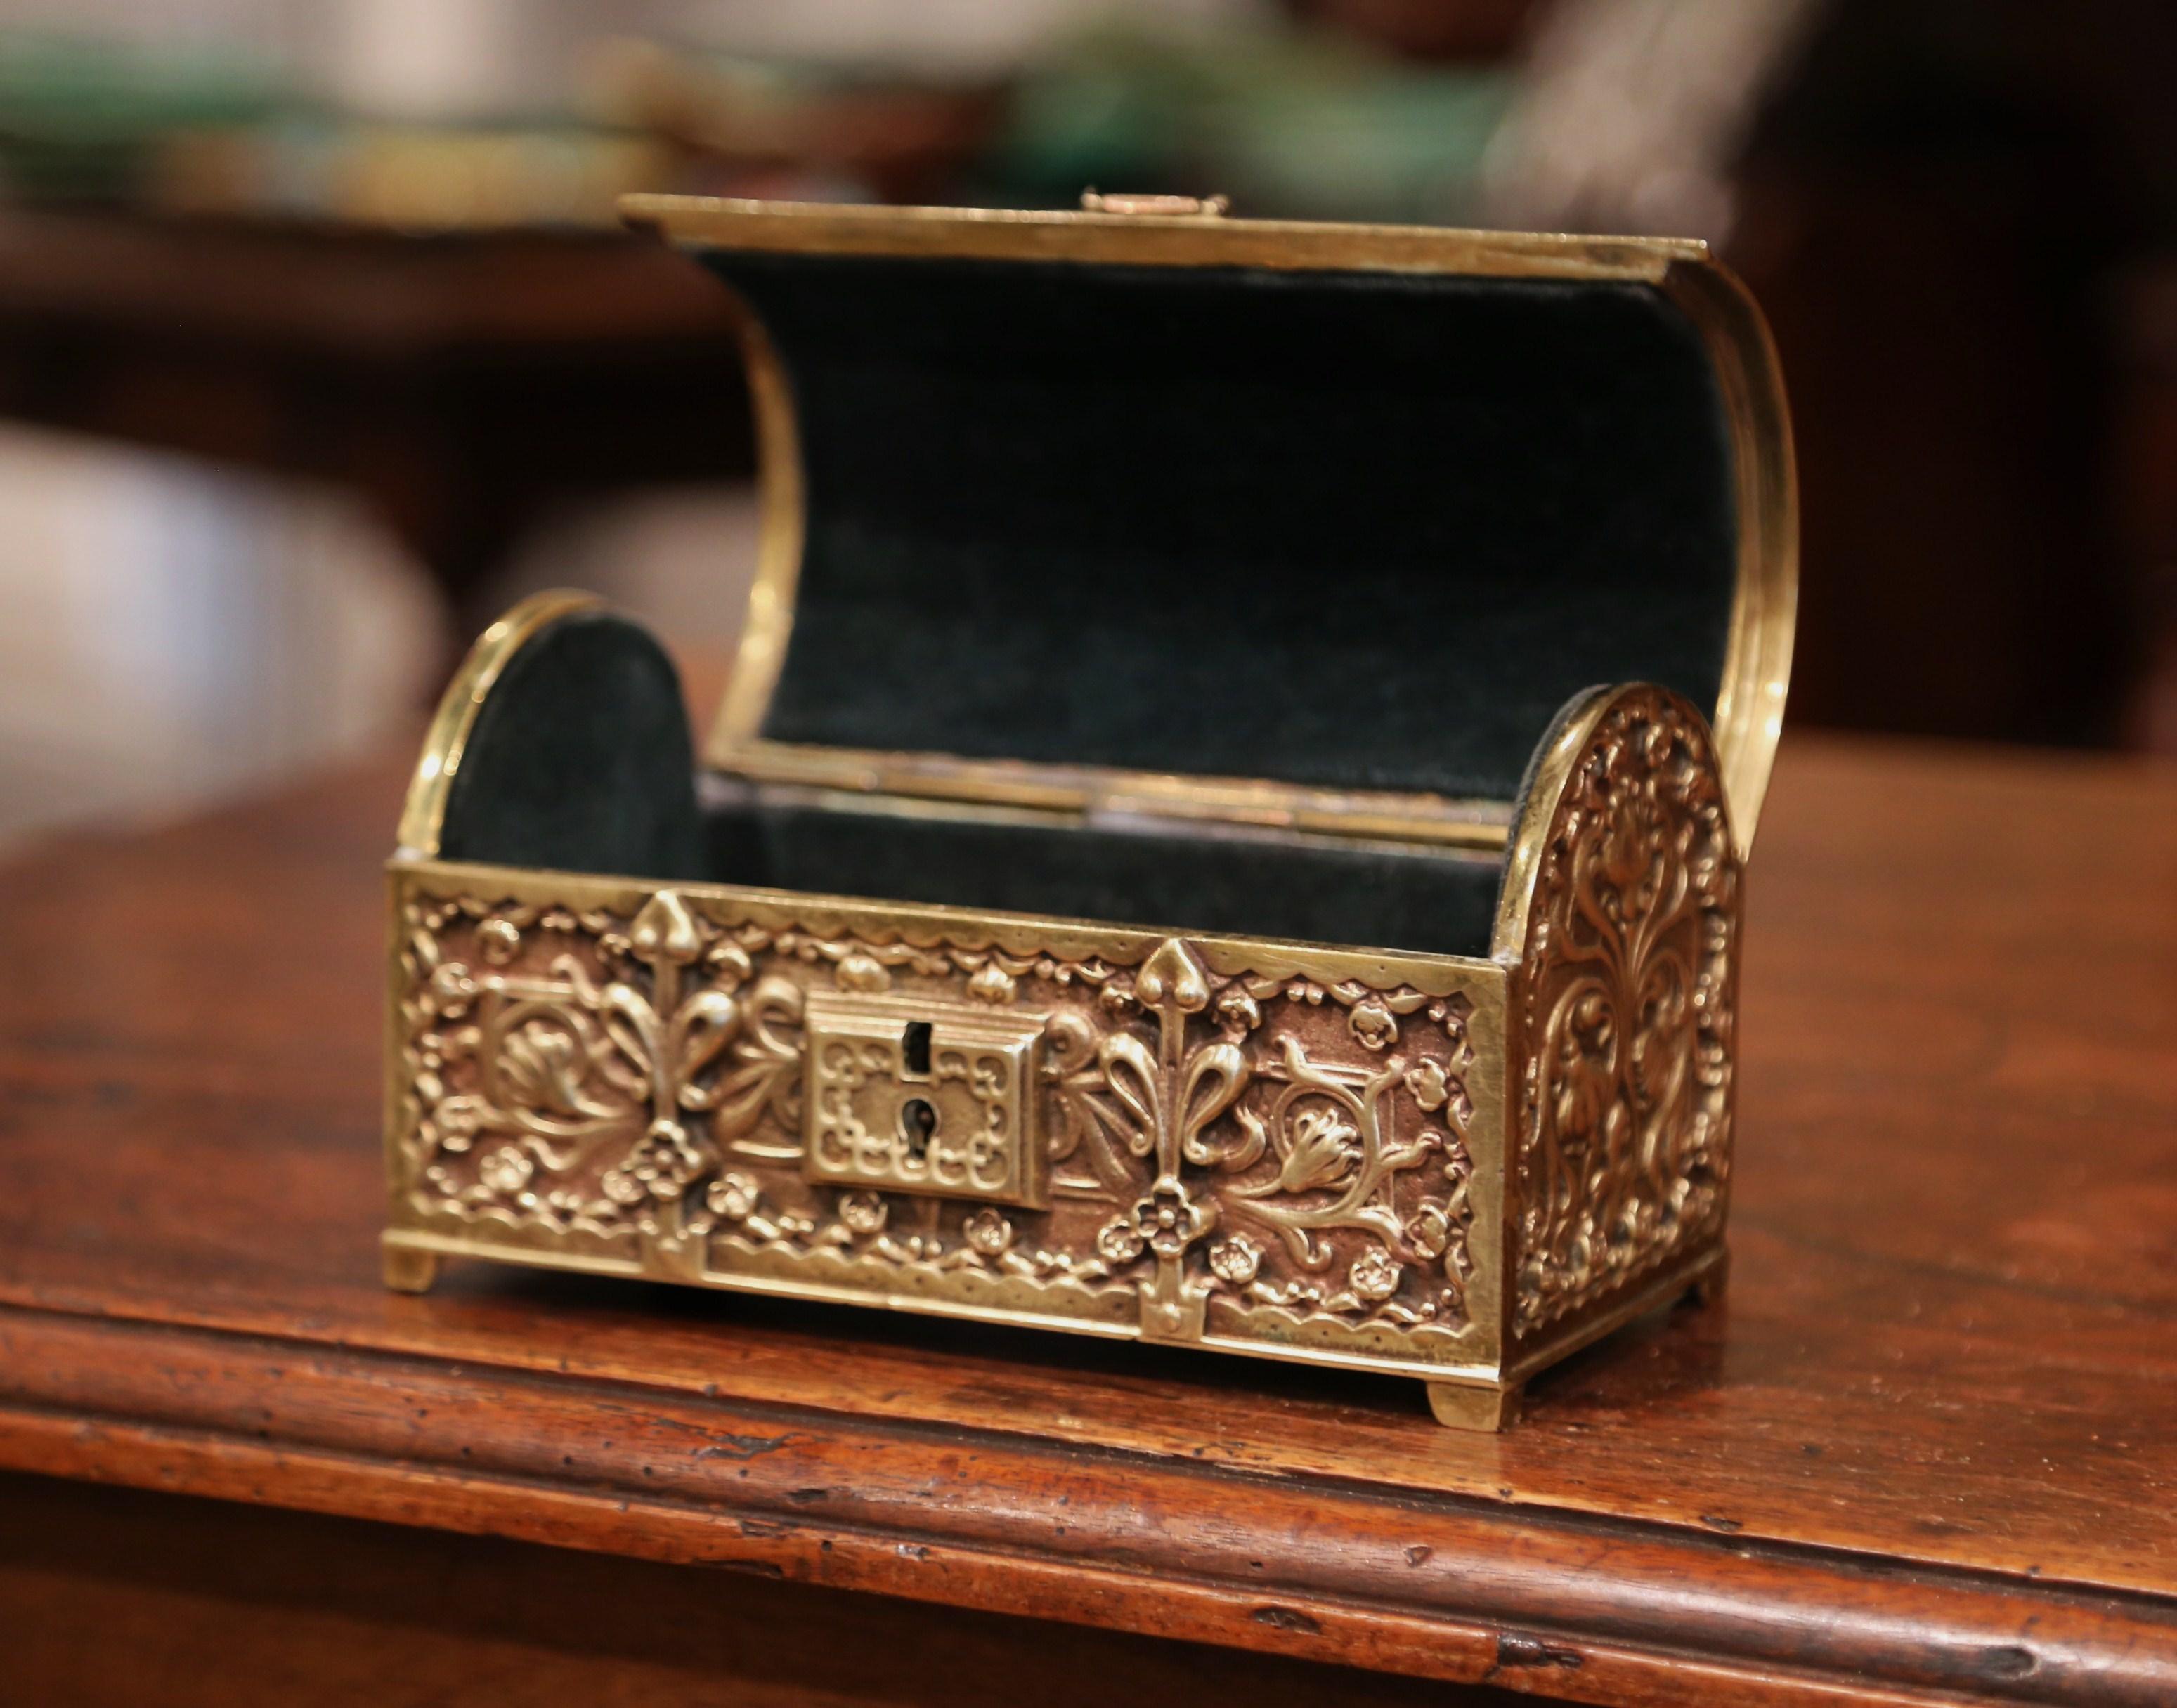 This antique gilt bronze casket was created in France, circa 1870. The miniature trunk-shaped box has a bombe top with handle, and is embellished with intricate floral and leaf decor on all four sides. The jewelry box is decorated with a classic